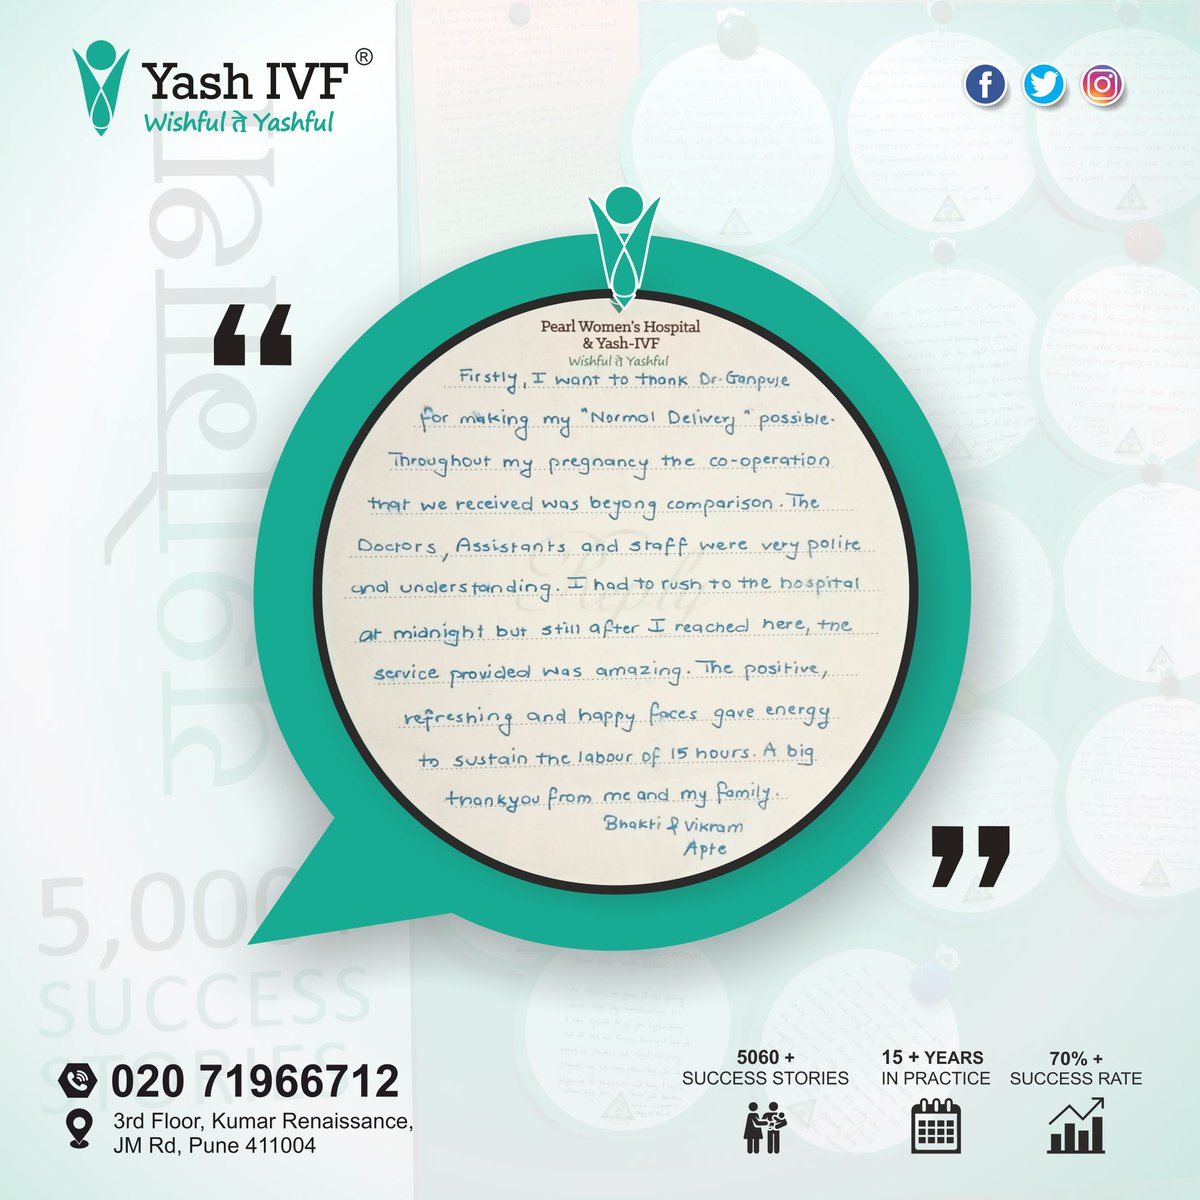 It Could Be Your Happy Story Too!!!
For more Details: pearlwomenshospital.com
#pearlwomenshospital #yashivf #infertility #fertilityclinic #wishfulteyashful #wishfulteyashful #successrate #success #successstory #success #happystory #patients #ivf #testtubebaby #ivfcost #costofivf